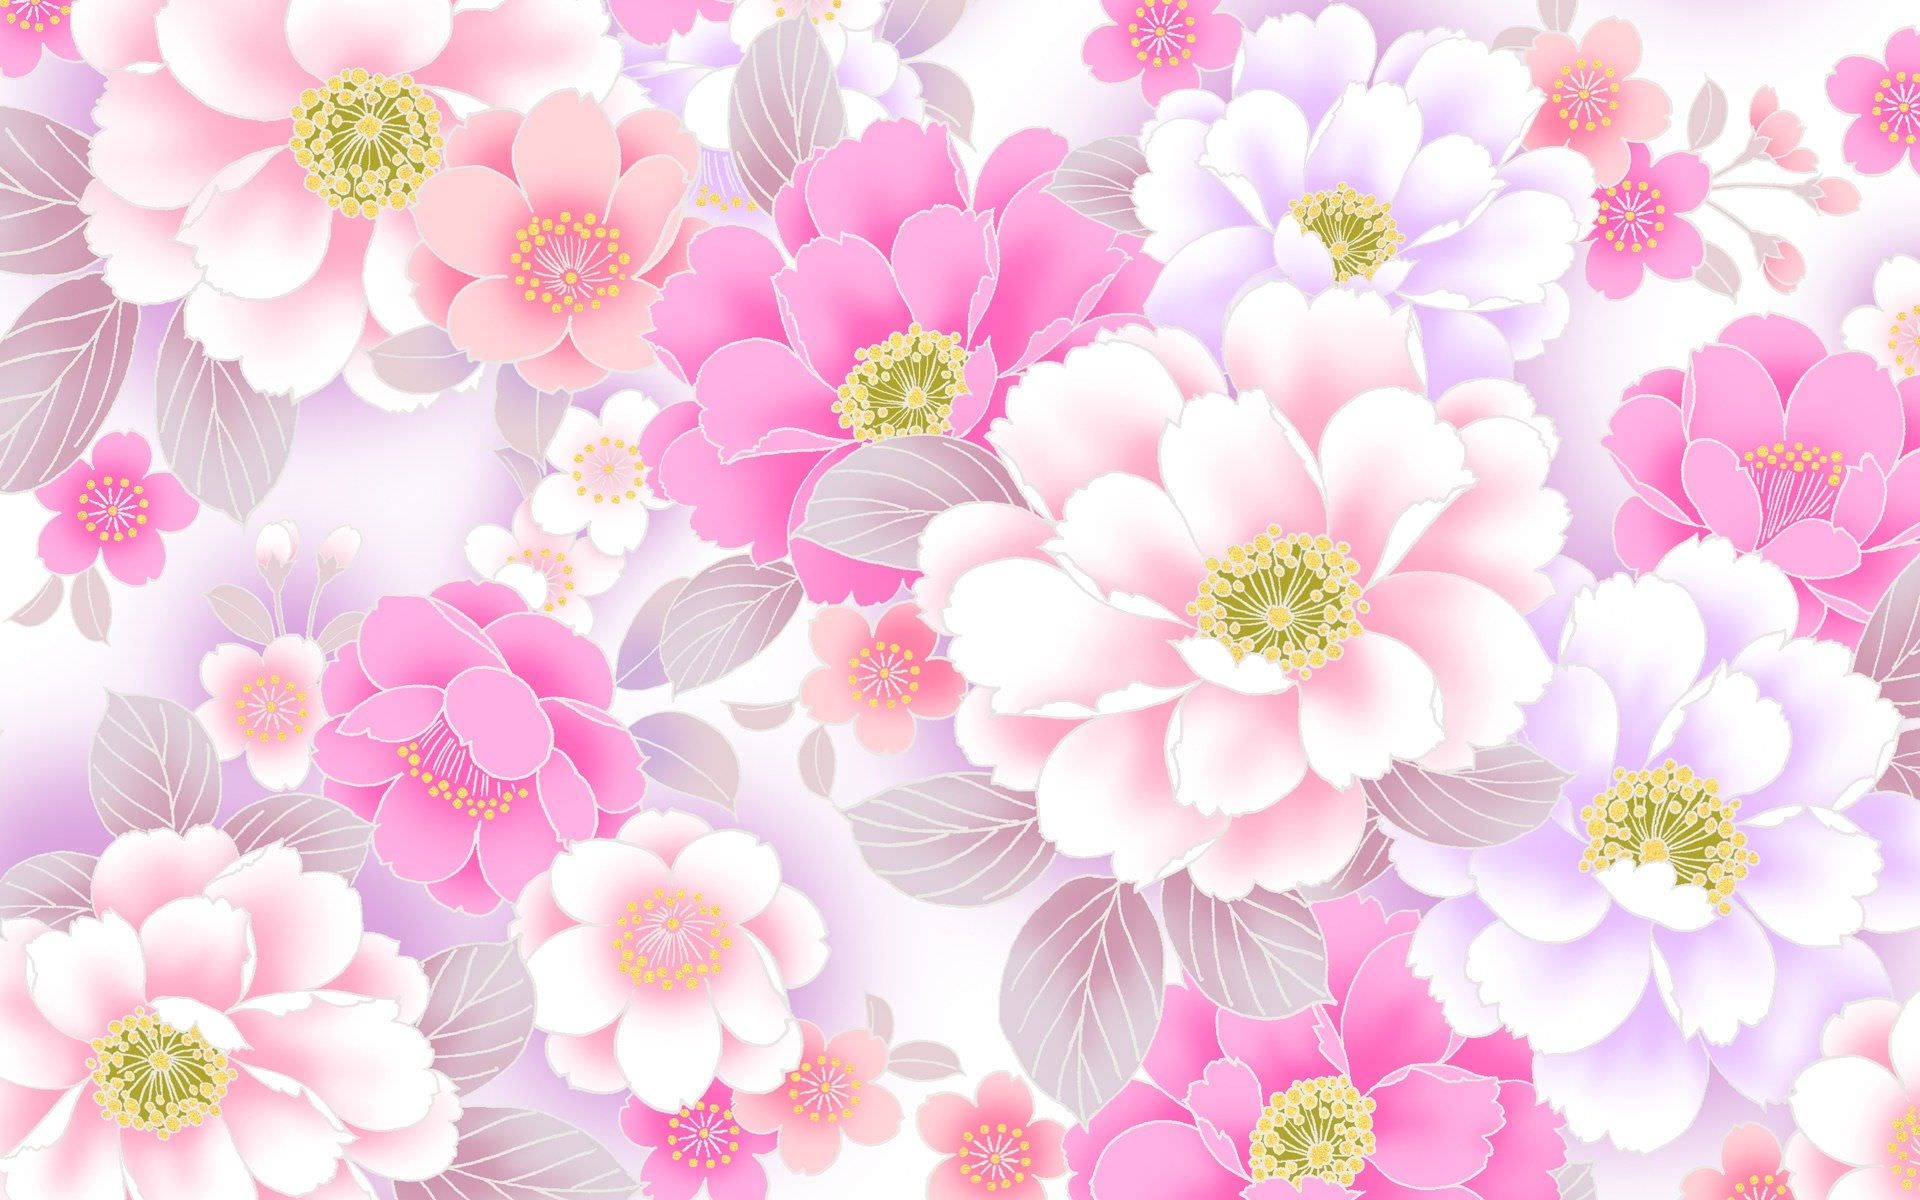 Pink Flower Wallpapers